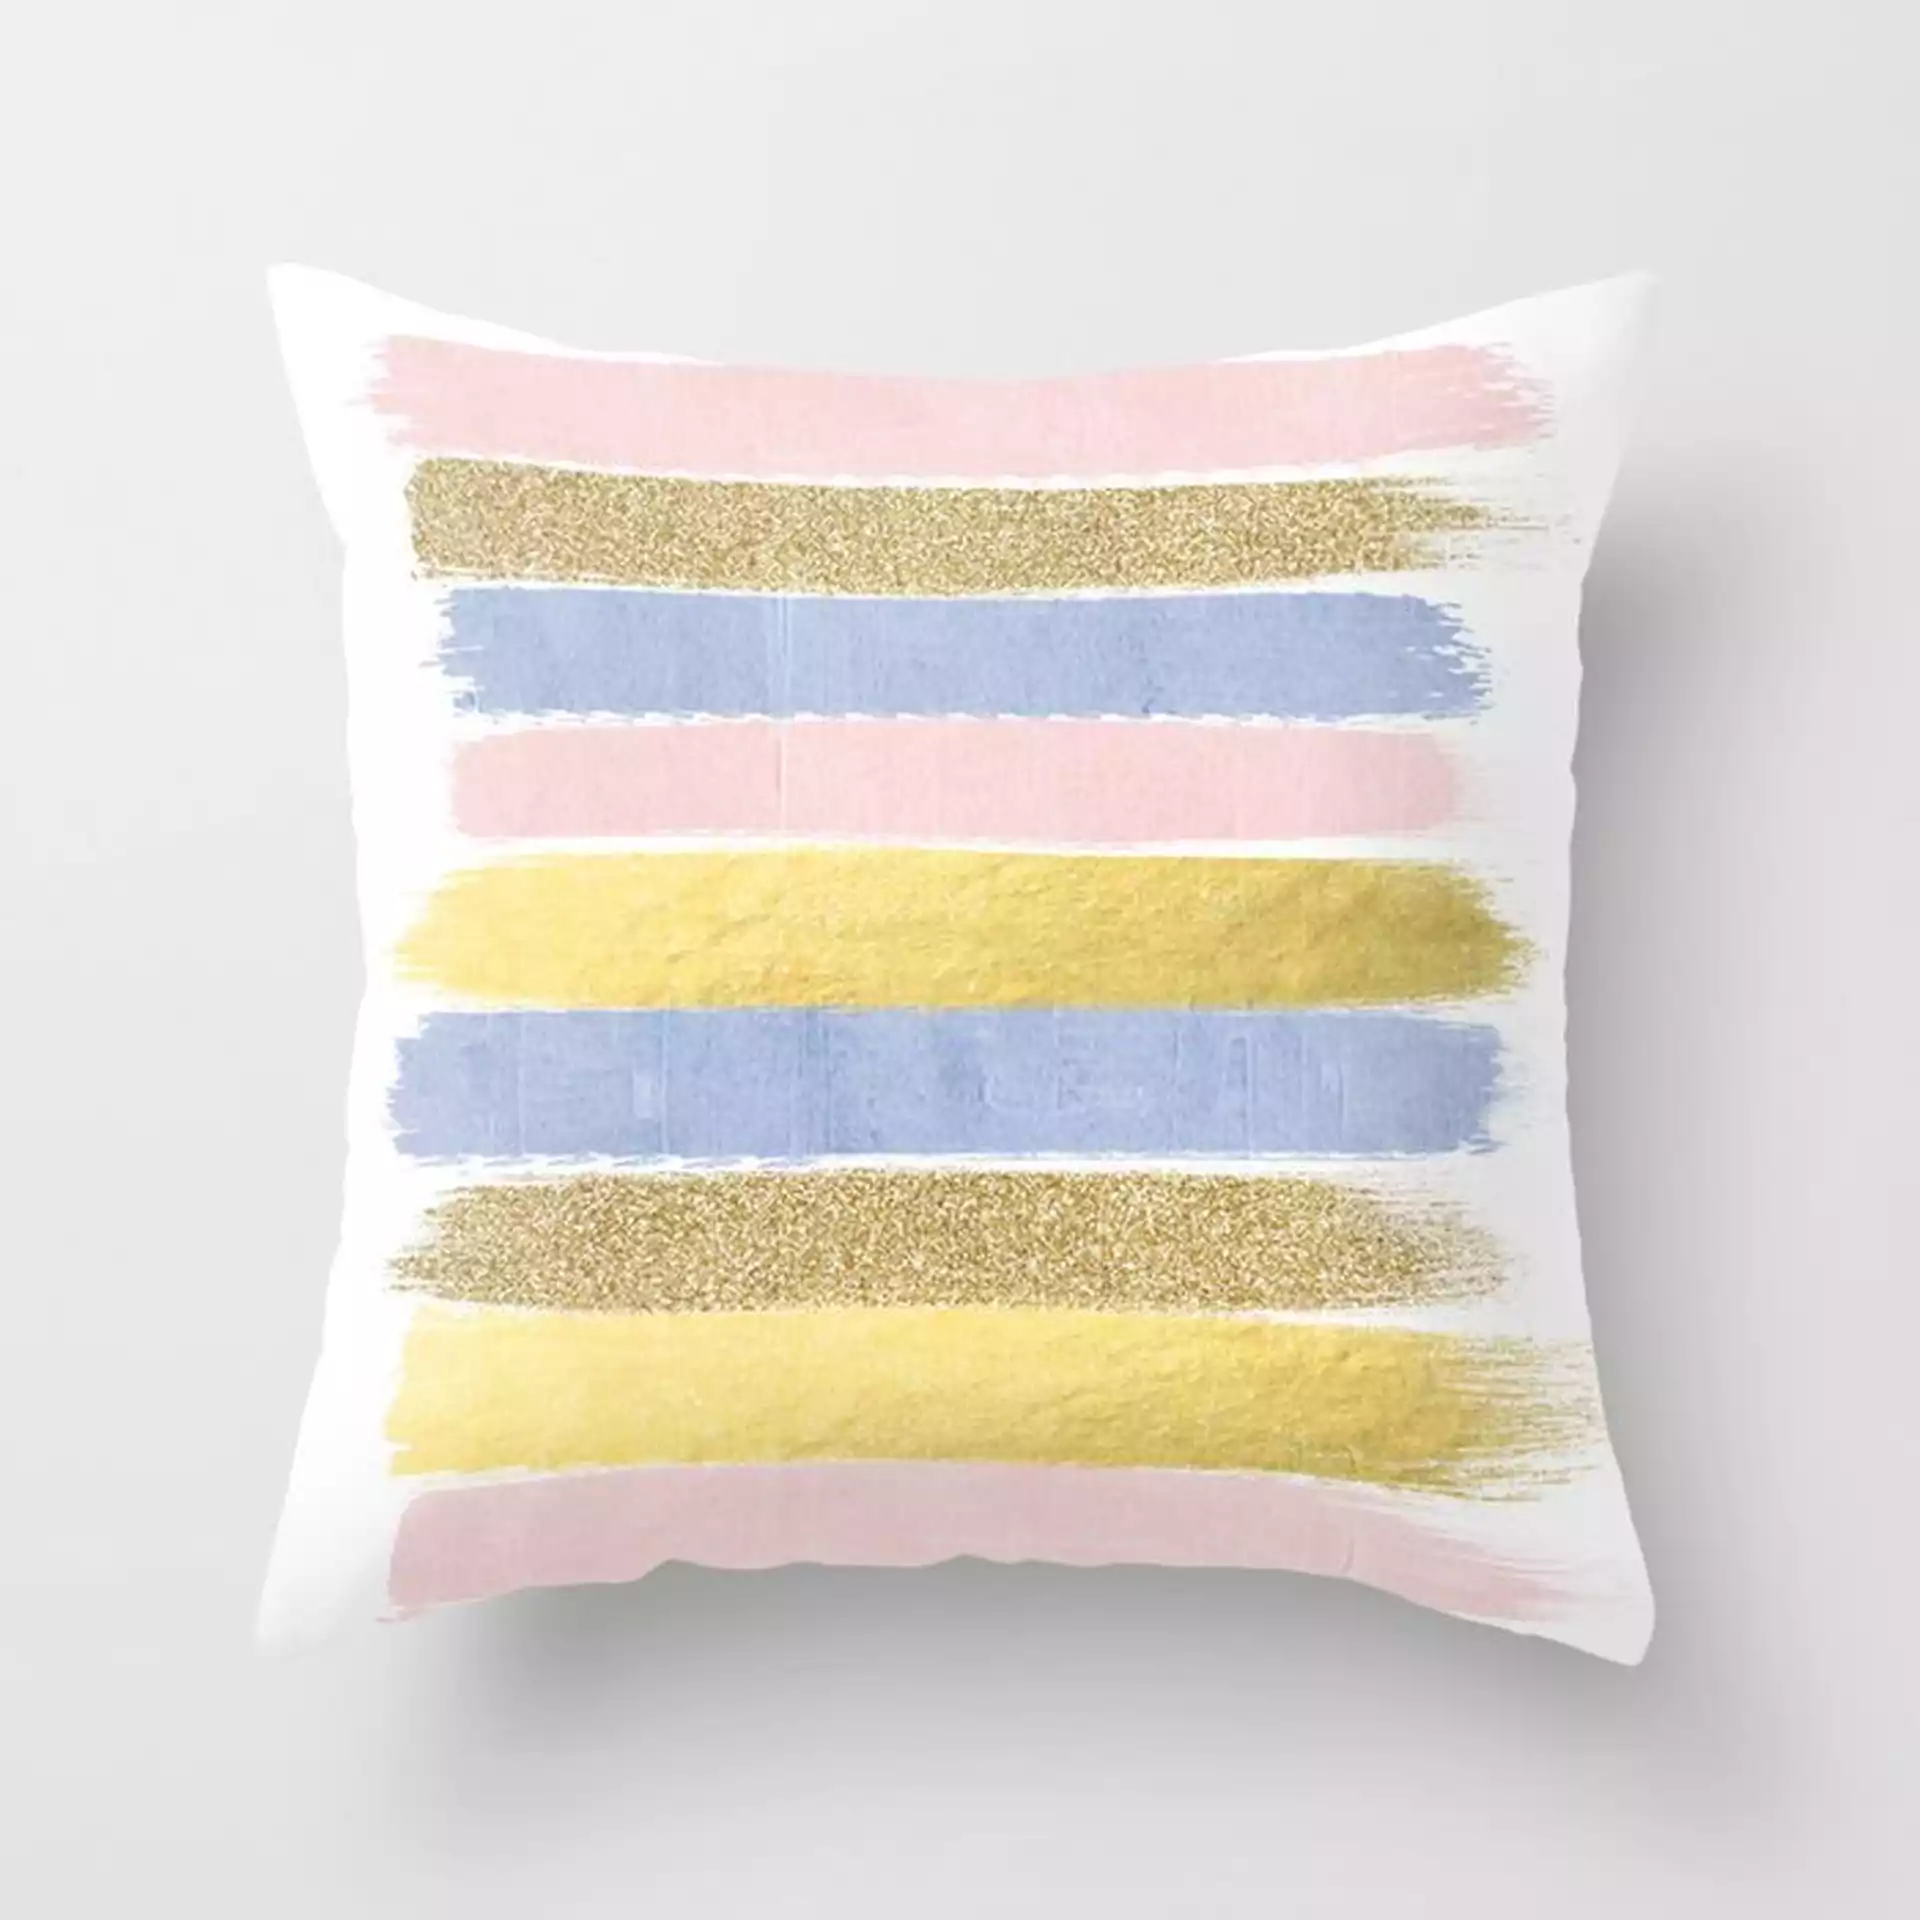 Pantone Gold Glitter Modern Minimal Brushstrokes Abstract Art Trendy Palette Girly Pastel Gifts Couch Throw Pillow by Charlottewinter - Cover (16" x 16") with pillow insert - Indoor Pillow